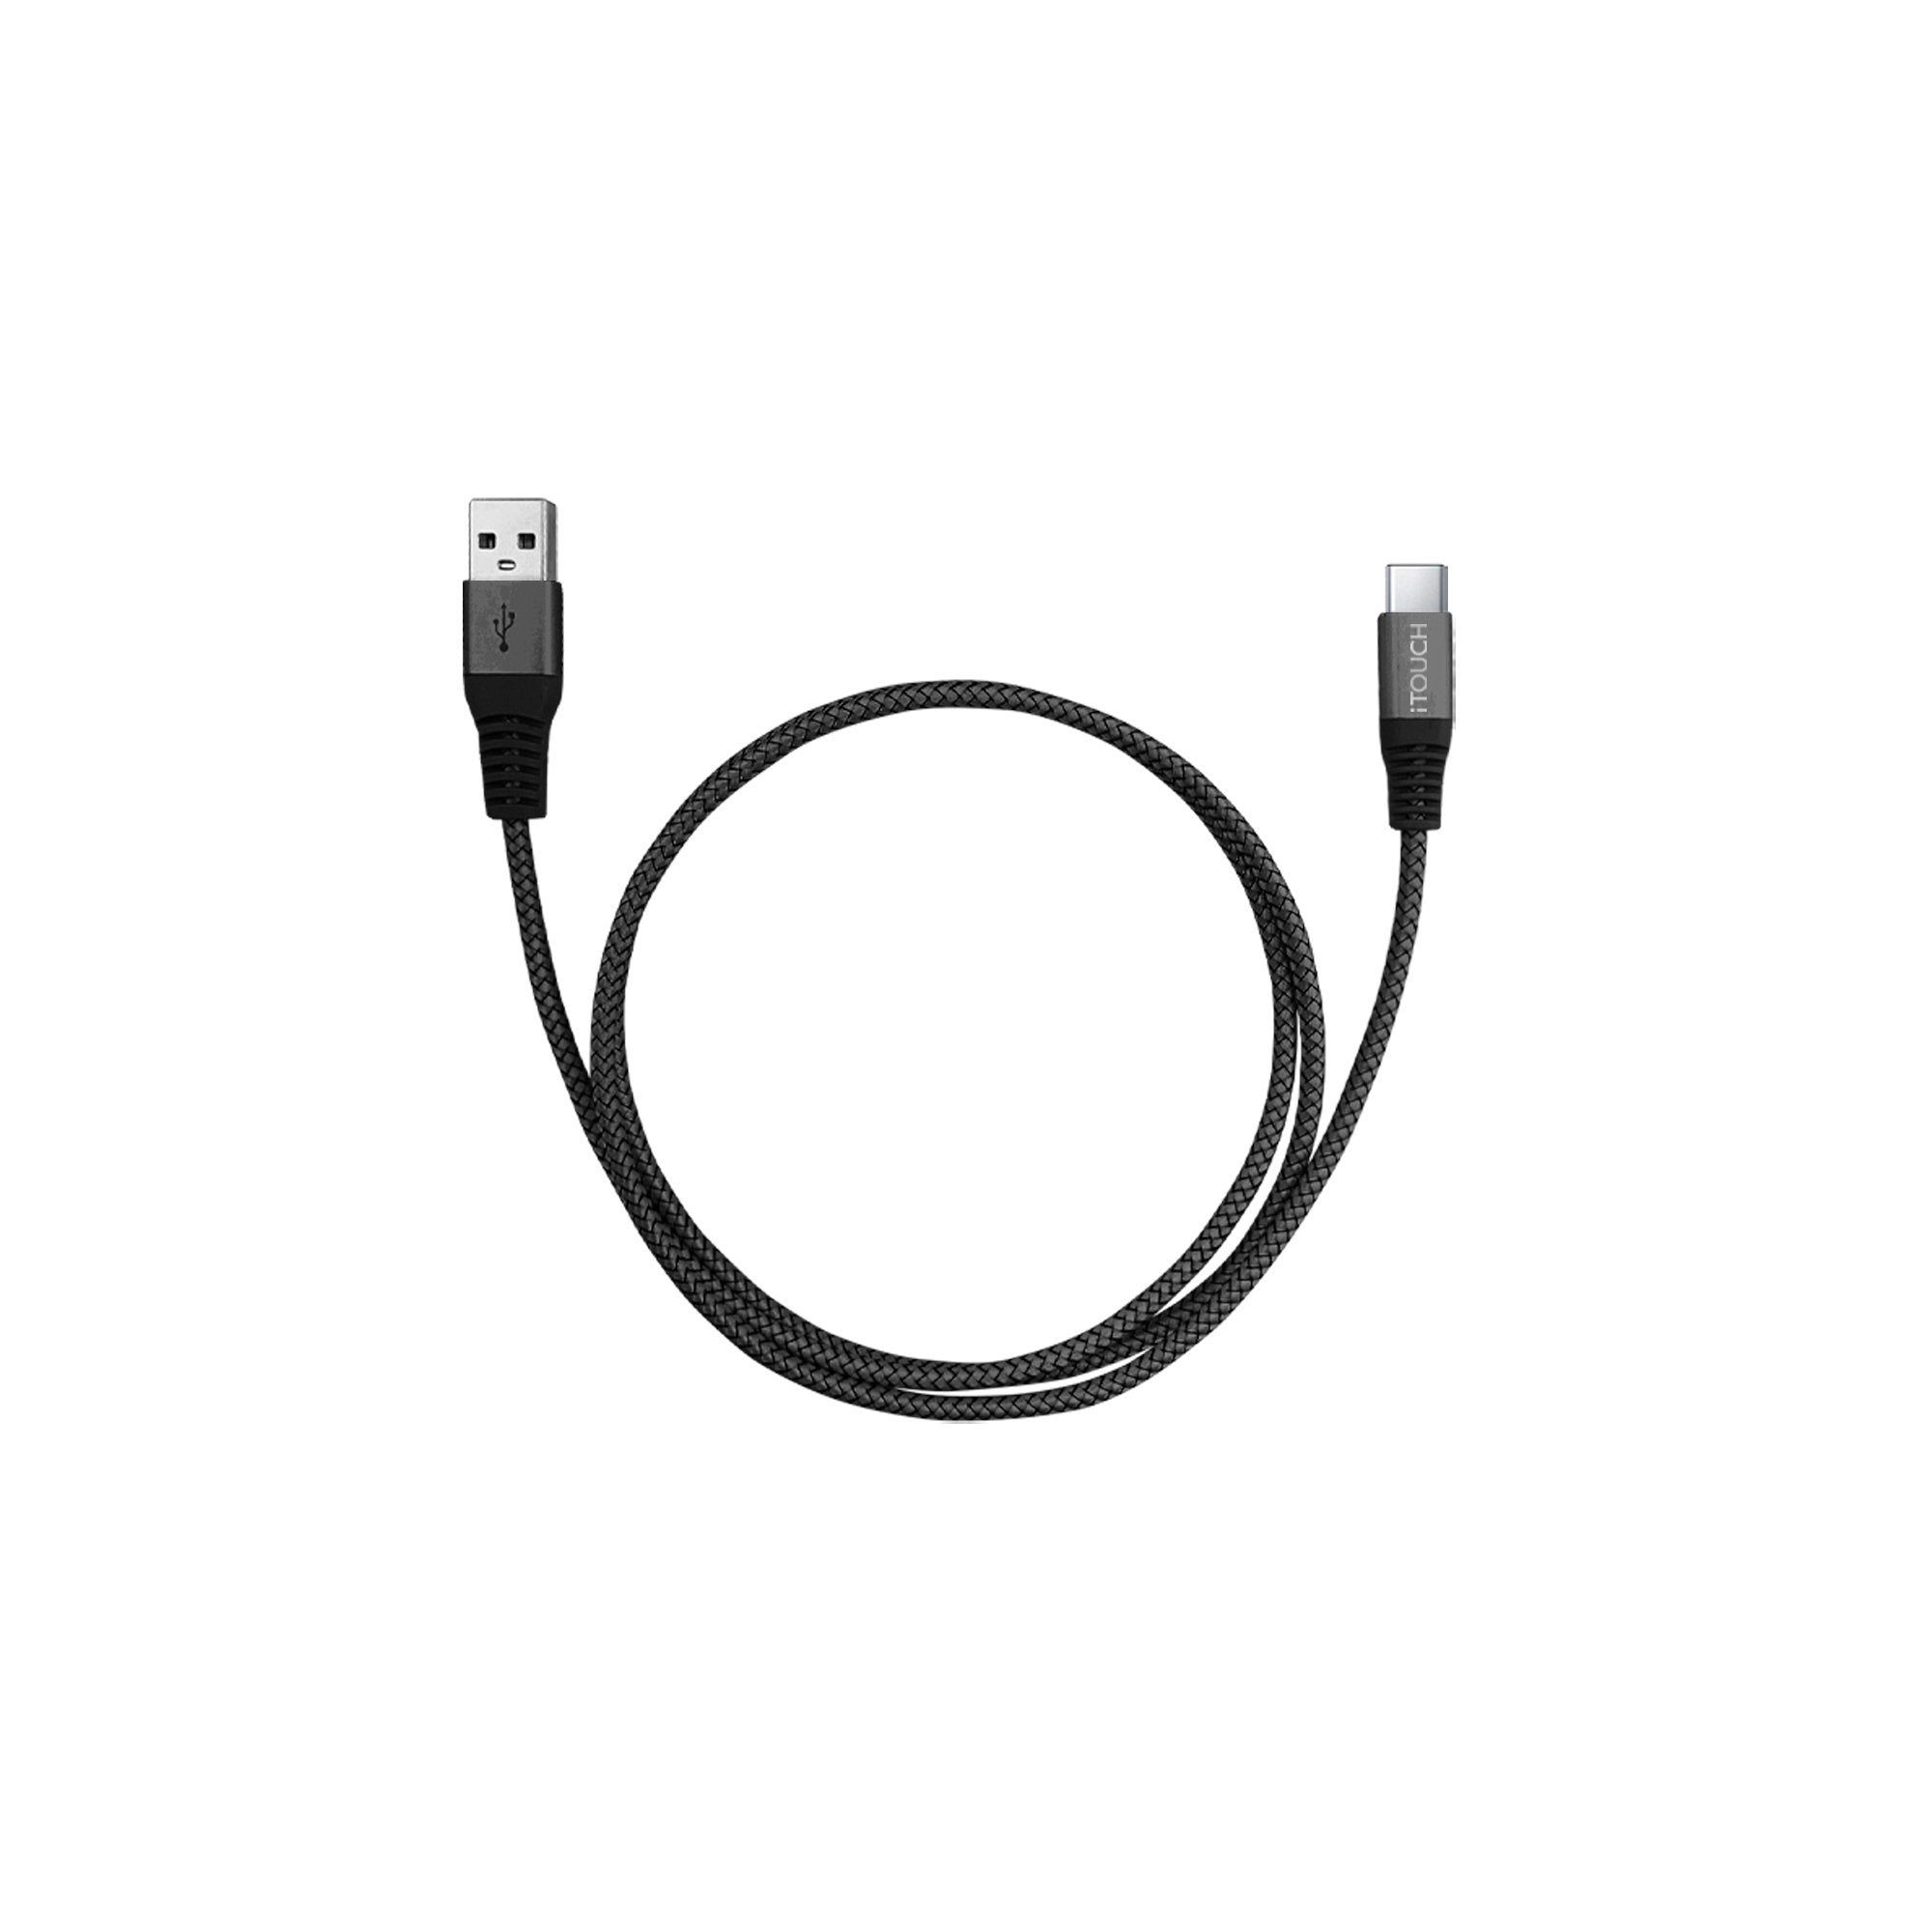 Micro USB Charging Cable: Black affordable charger